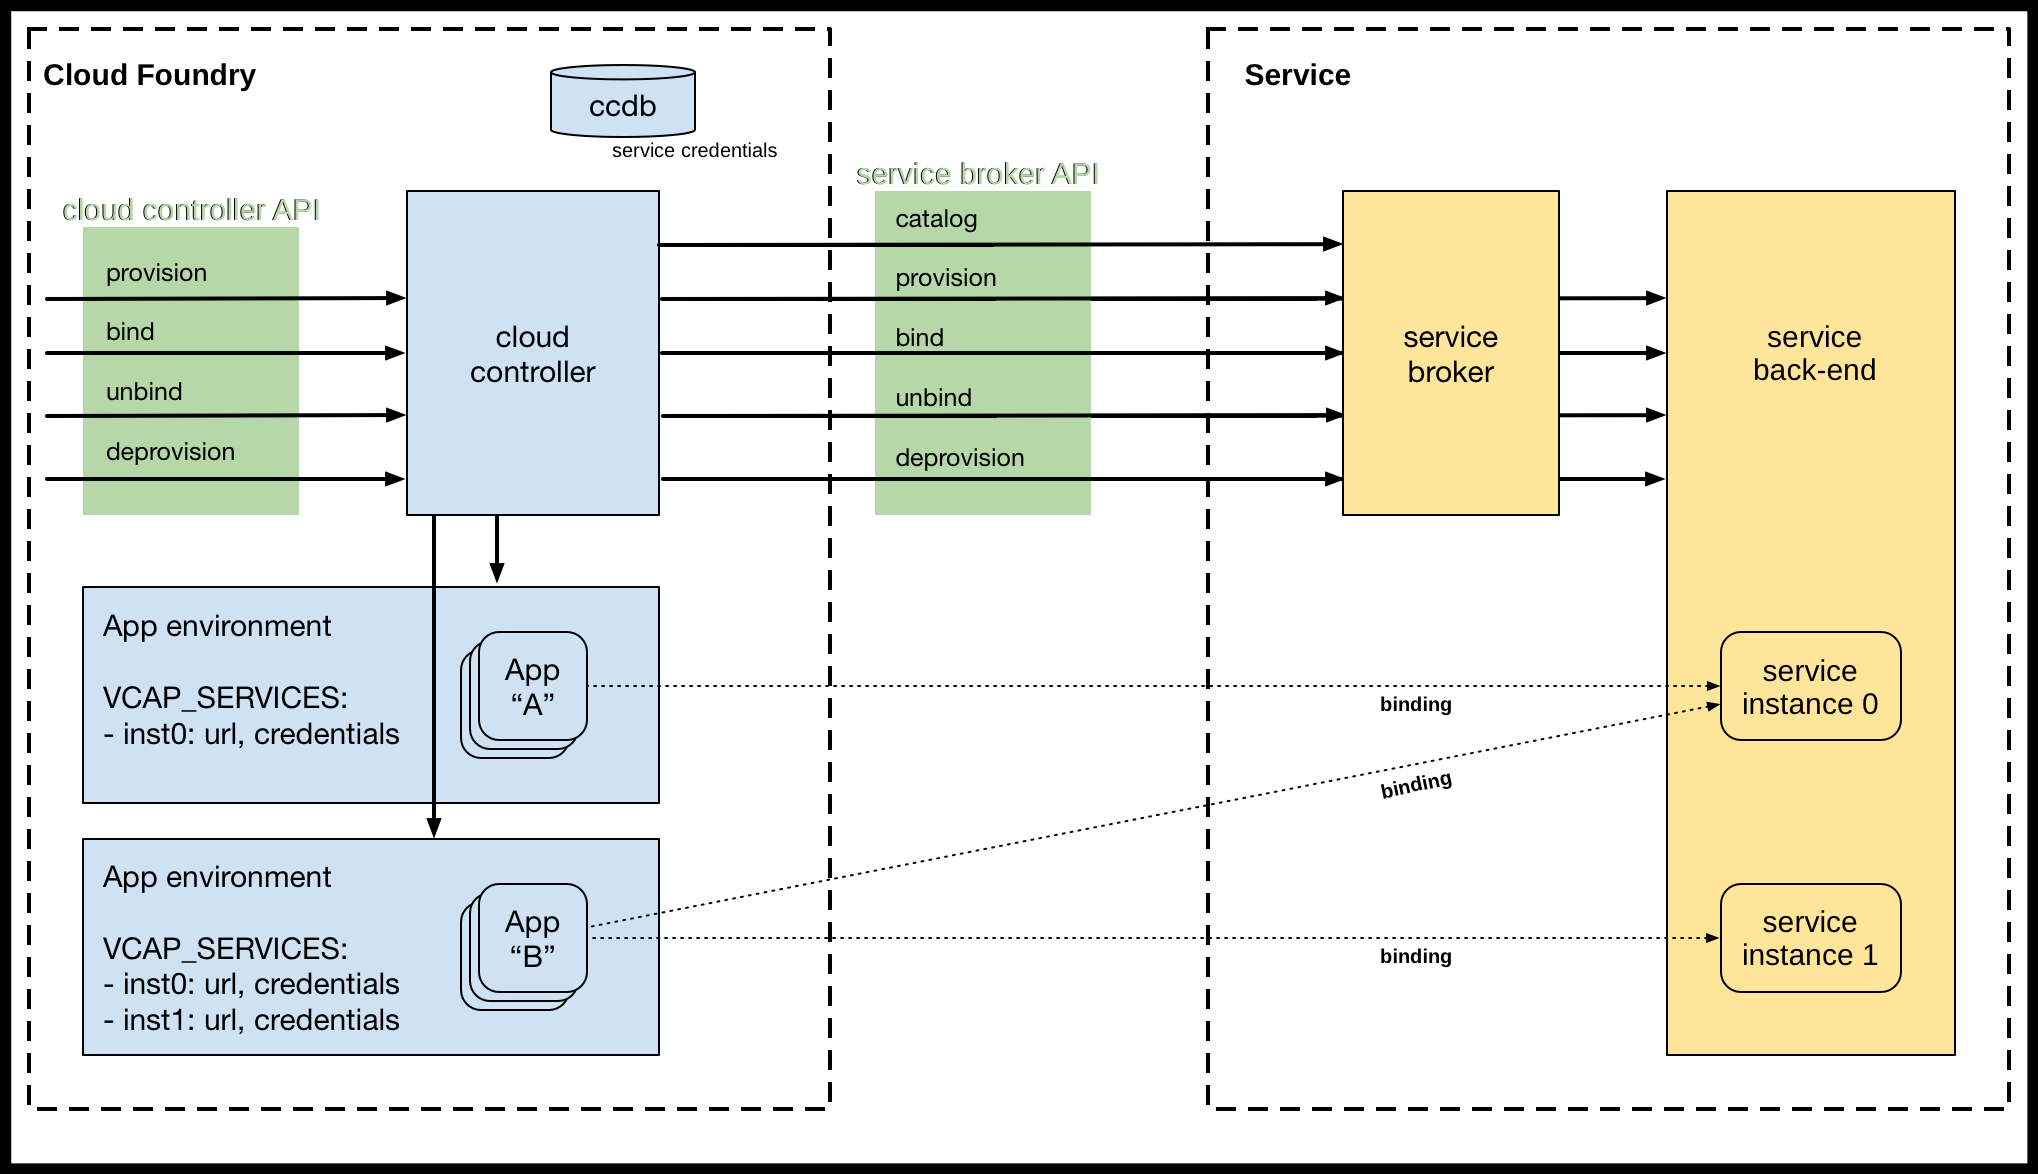 Diagram showing how services interact with the Cloud Foundry. The diagram shows the following components: 'Service Broker', 'cloud controller', 'App environment', and 'service instances'.